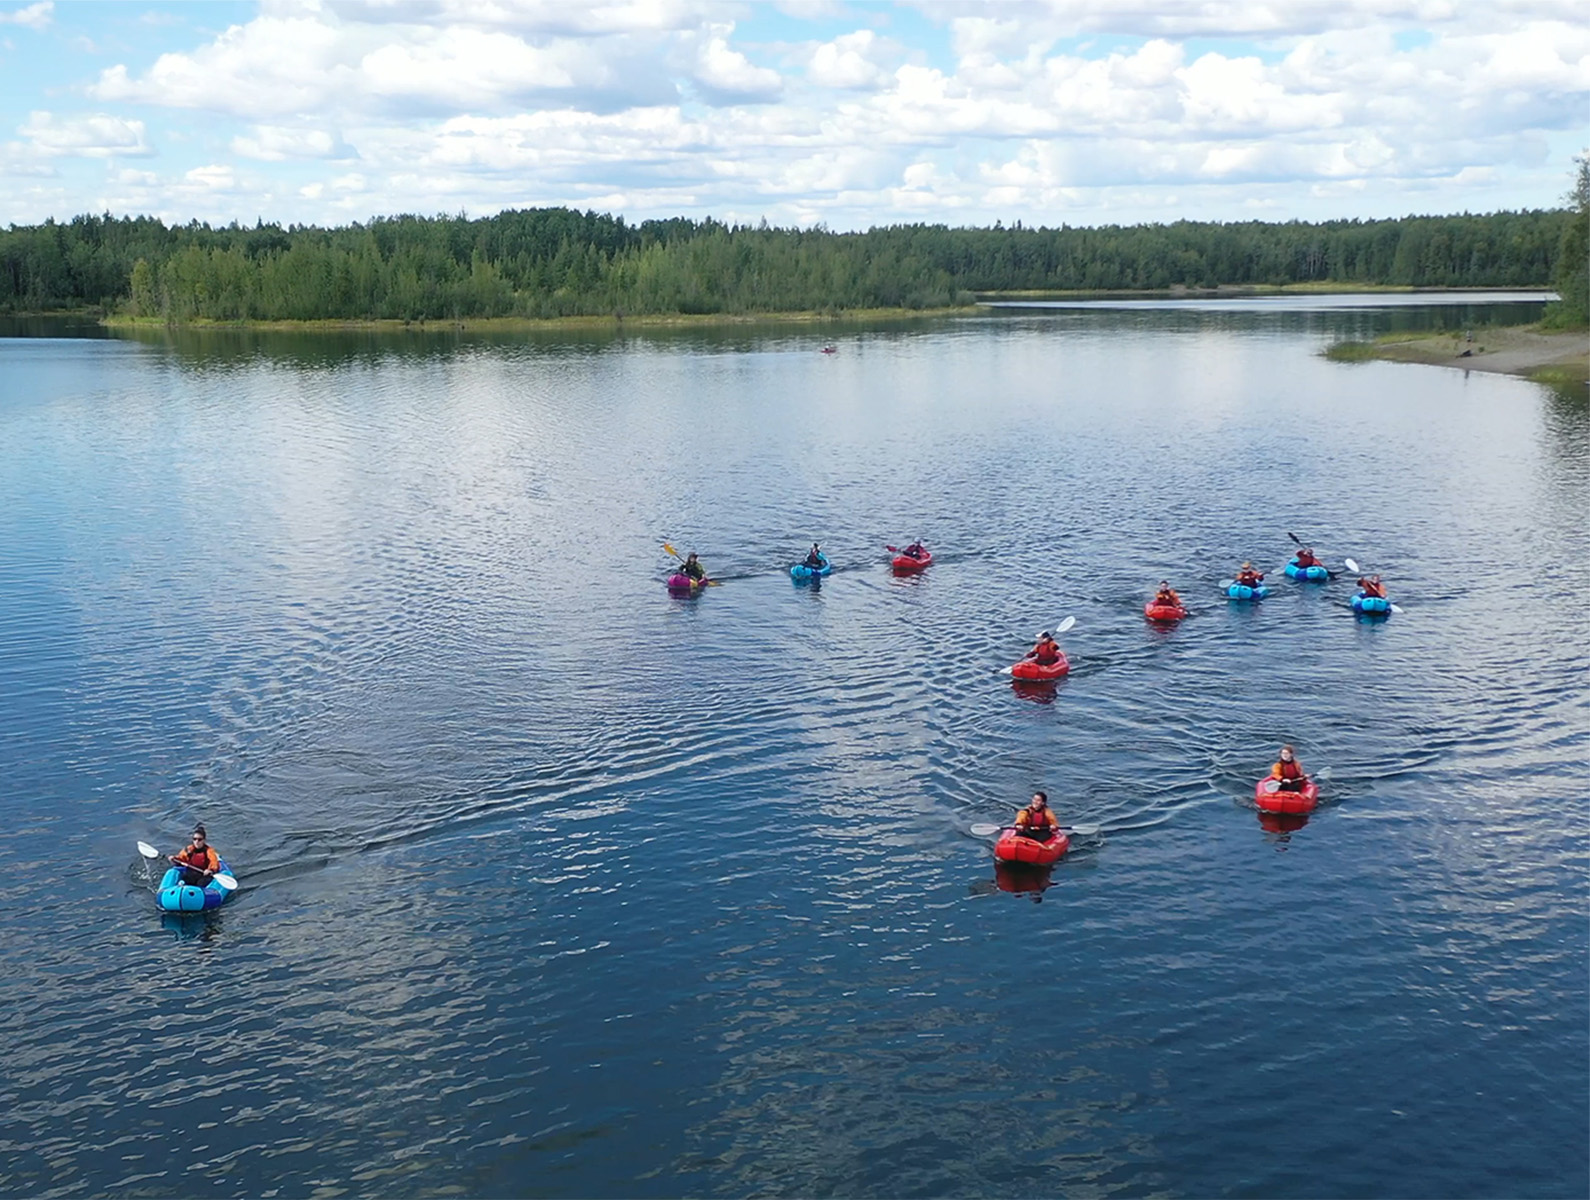 Girls in the Forest participants and instructors practice their packrafting skills in the Chena Lake Recreation Area.